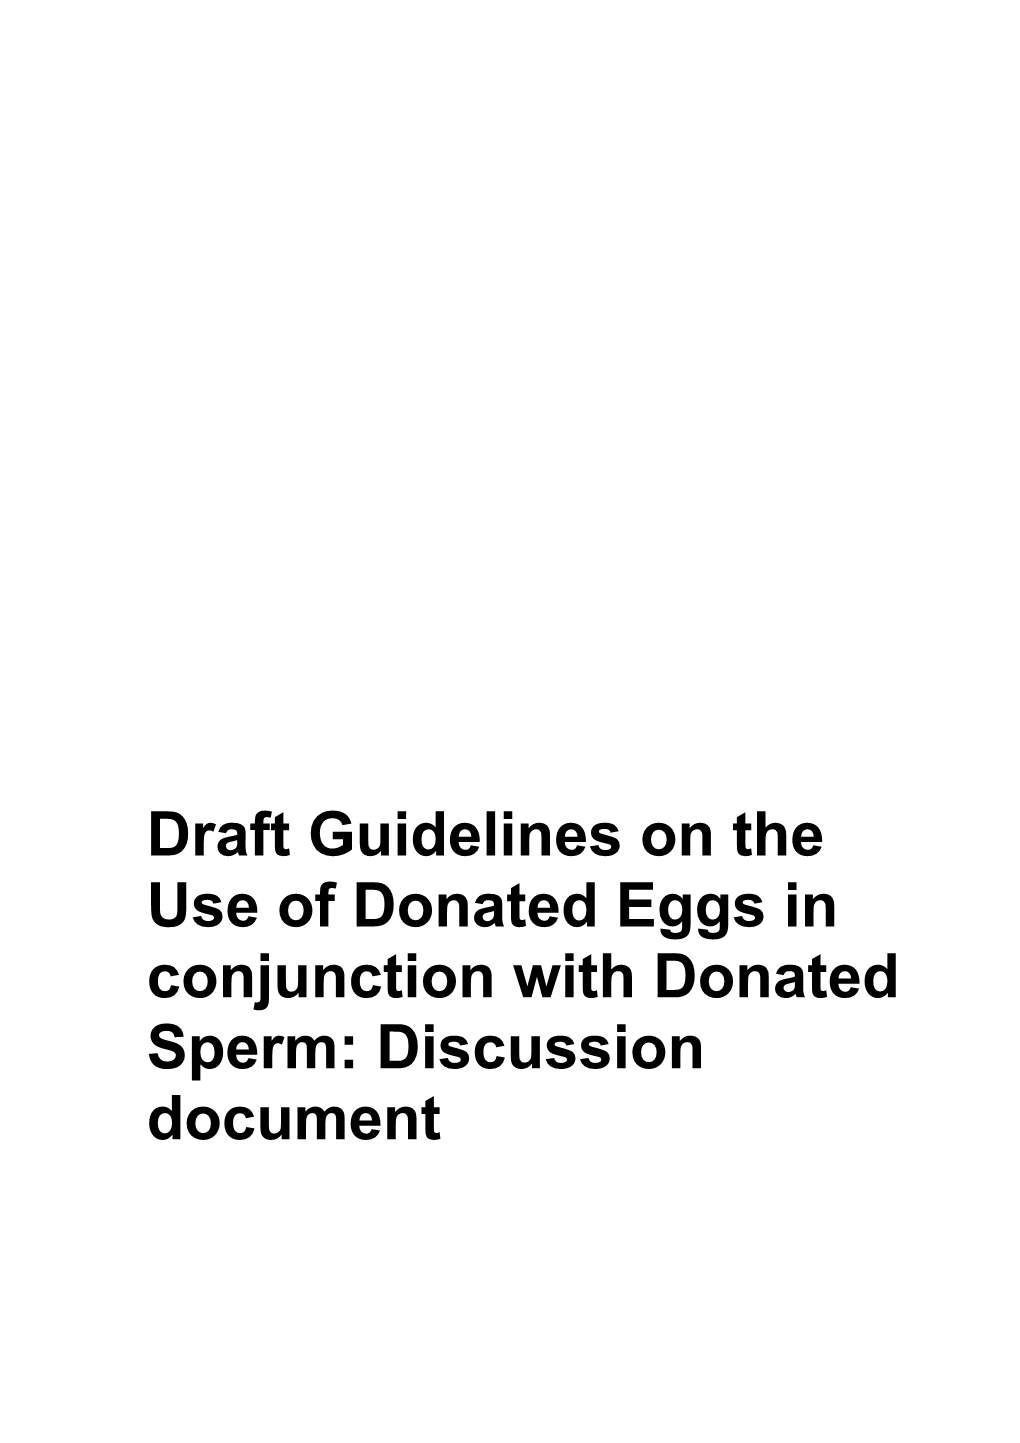 Draft Guidelines on the Use of Donated Eggs in Conjunction with Donated Sperm: Discussion